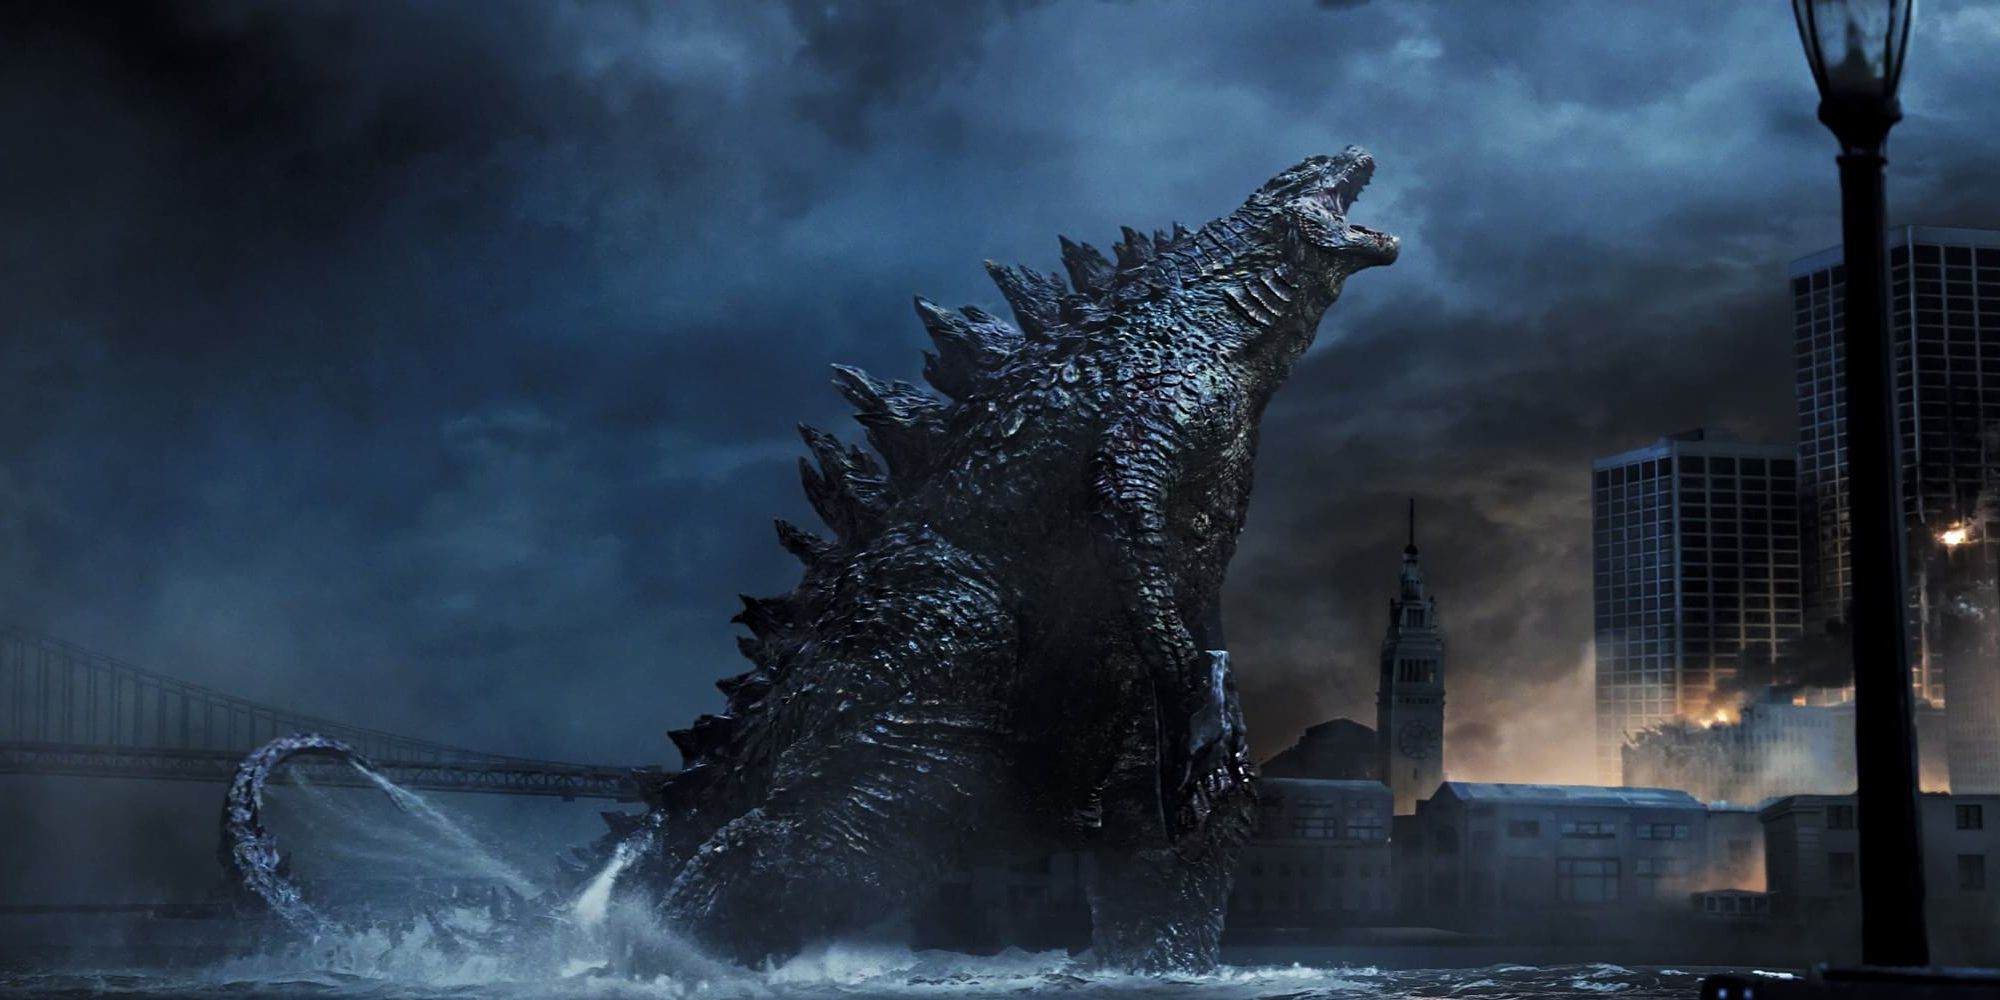 Godzilla comes out of the water and toward a city in 'Godzilla: King of the Monsters'